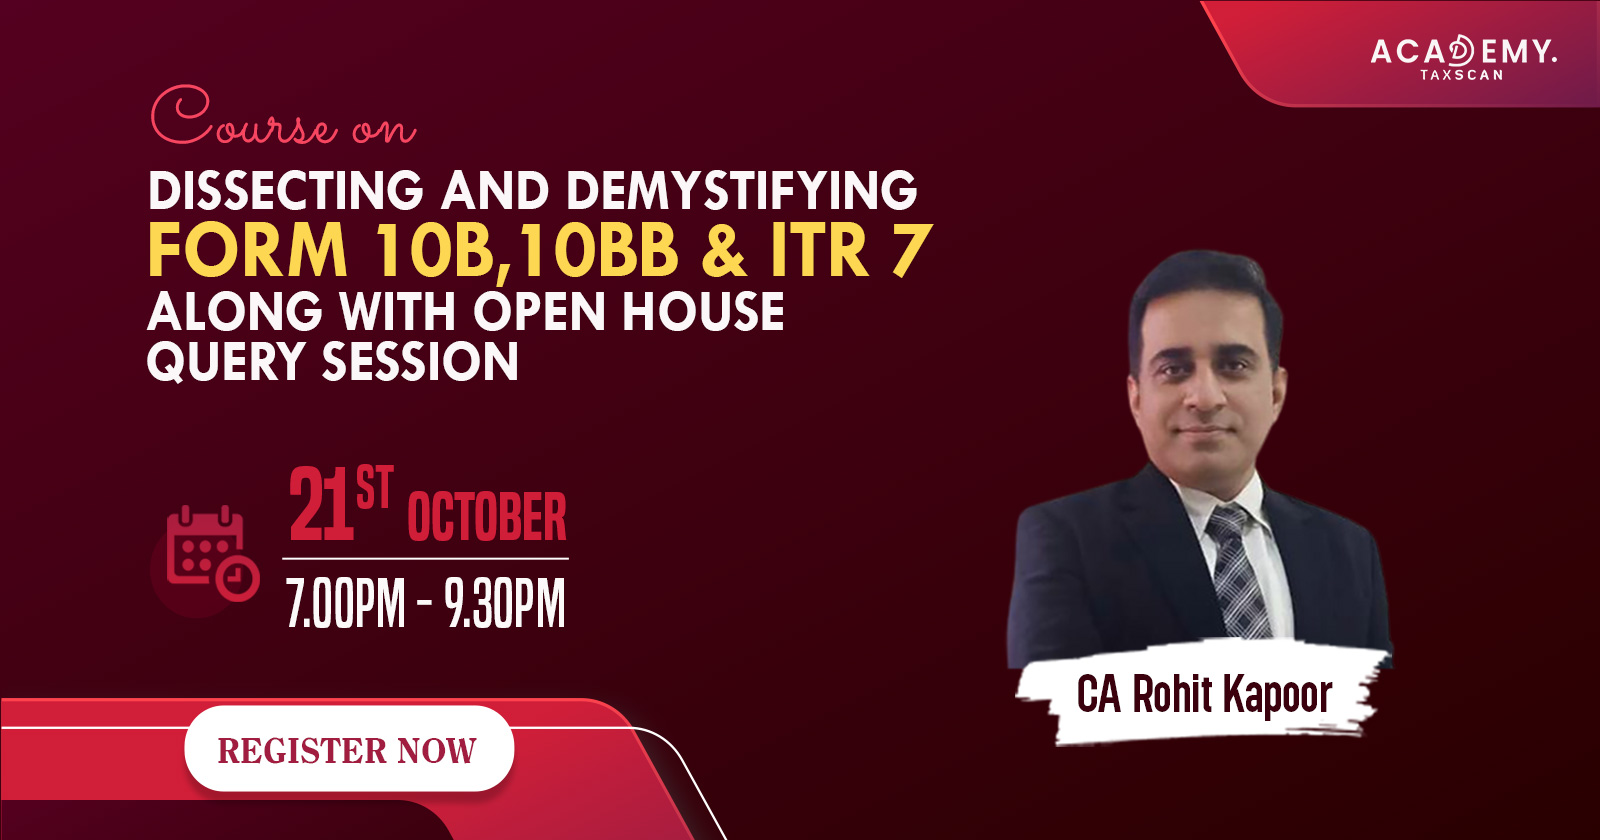 Dissecting and Demystifying Form 10B -10BB & ITR 7 -Form 10B -Form 10BB -Form ITR 7 ,ITR 7 -ITR -Open House Query Session - Query Session - Session - Elearning - OnlineEducation - VirtualLearning - OnlineLearning - OnlineCourses - Taxscan Academy